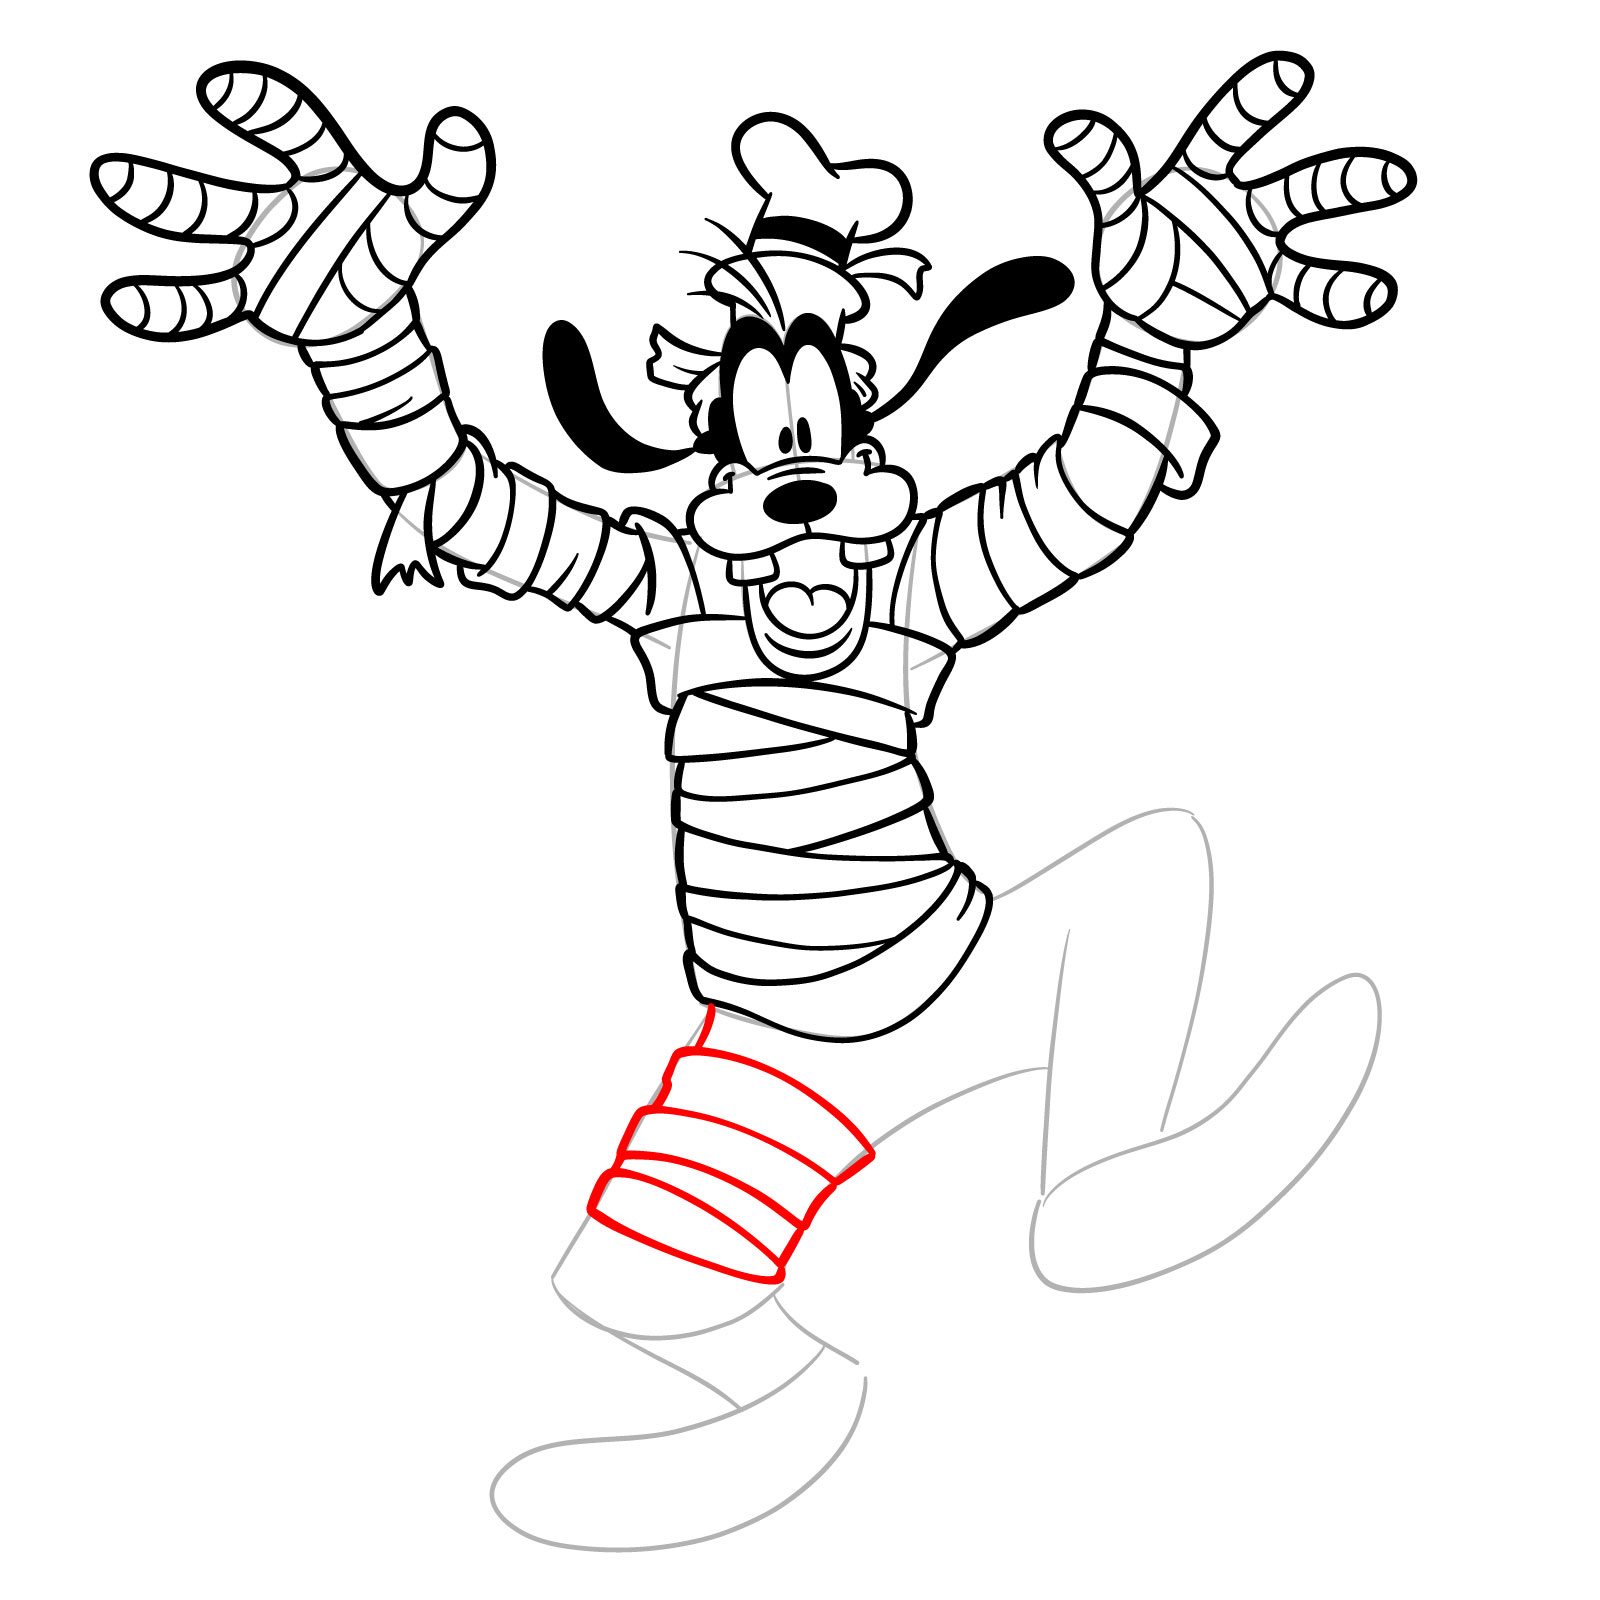 How to draw Halloween Goofy as a mummy - step 24